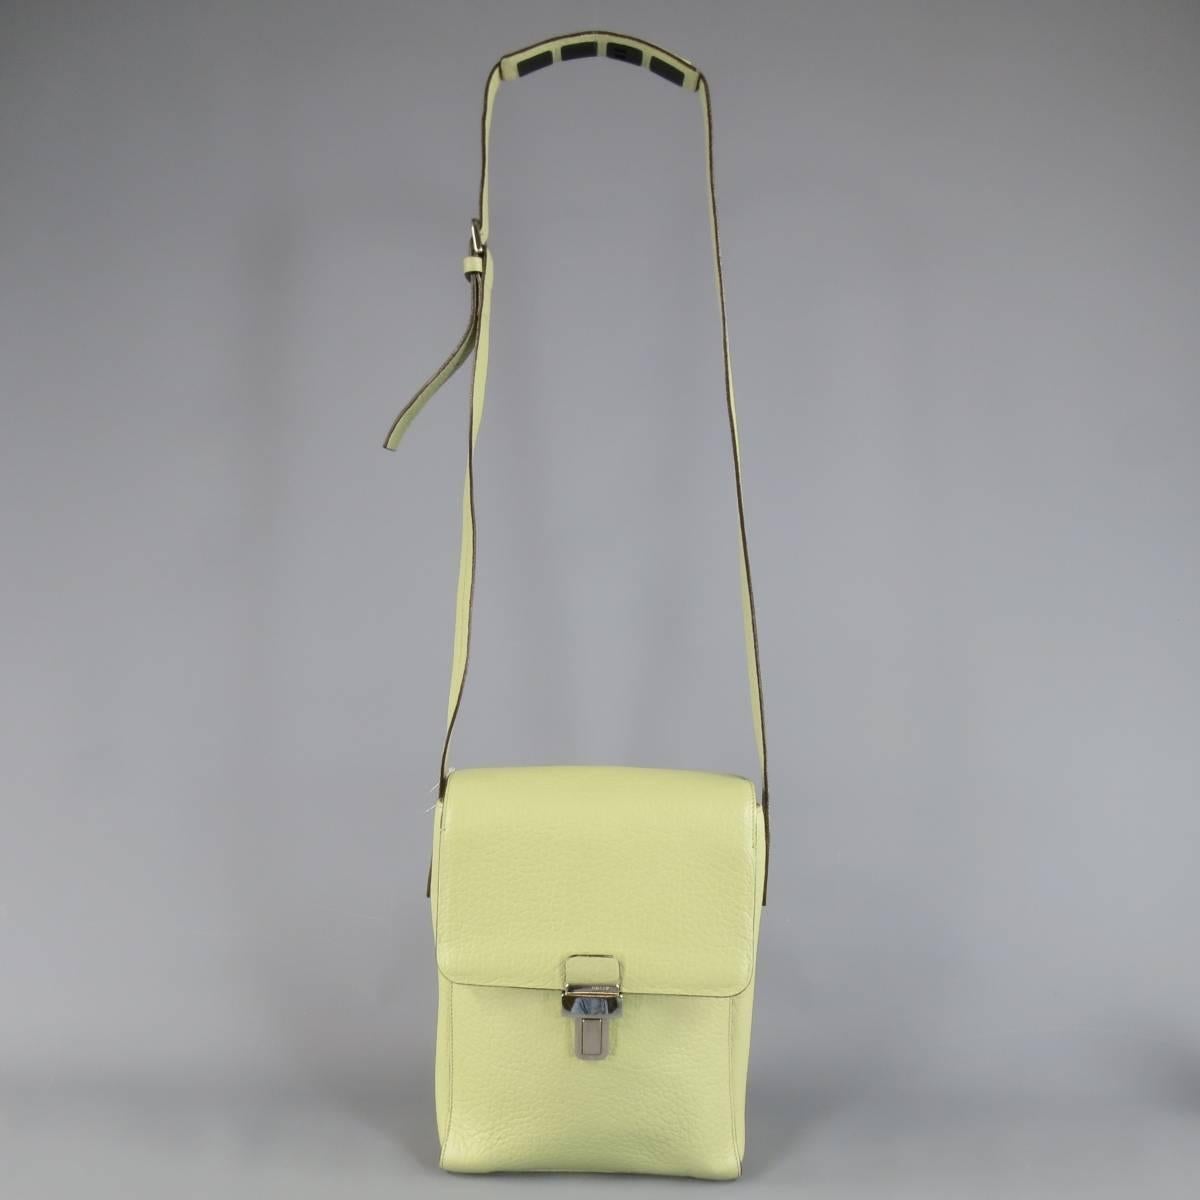 Vintage BALLY bag in a unique mint greenish tone beige textured leather featuring a flap with silver tone buckle, double storage compartments, and shoulder strap with rubber grip panel. In excellent condition with exception of the buckle being